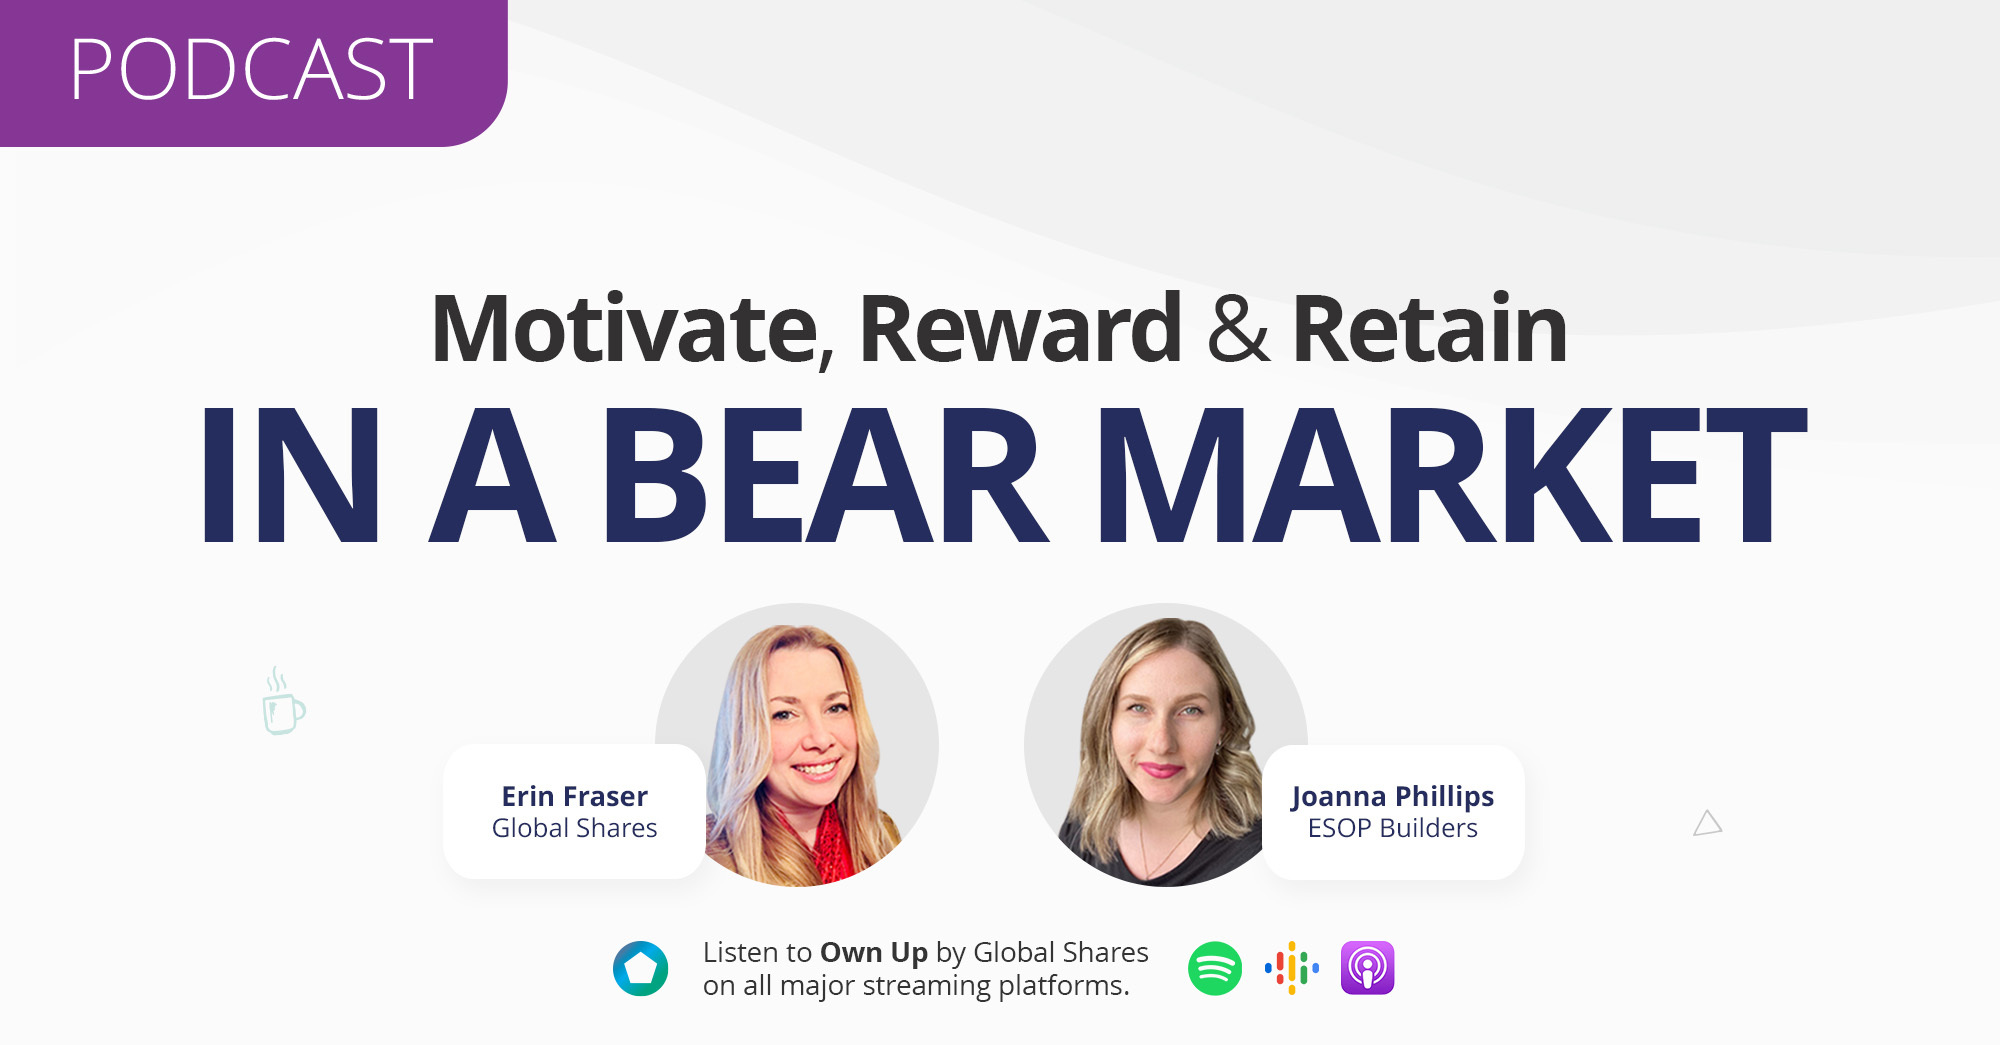 Own Up Podcast: How to Motivate, Reward & Retain Employees in a Bear Market with Erin Fraser & Joanna Phillips